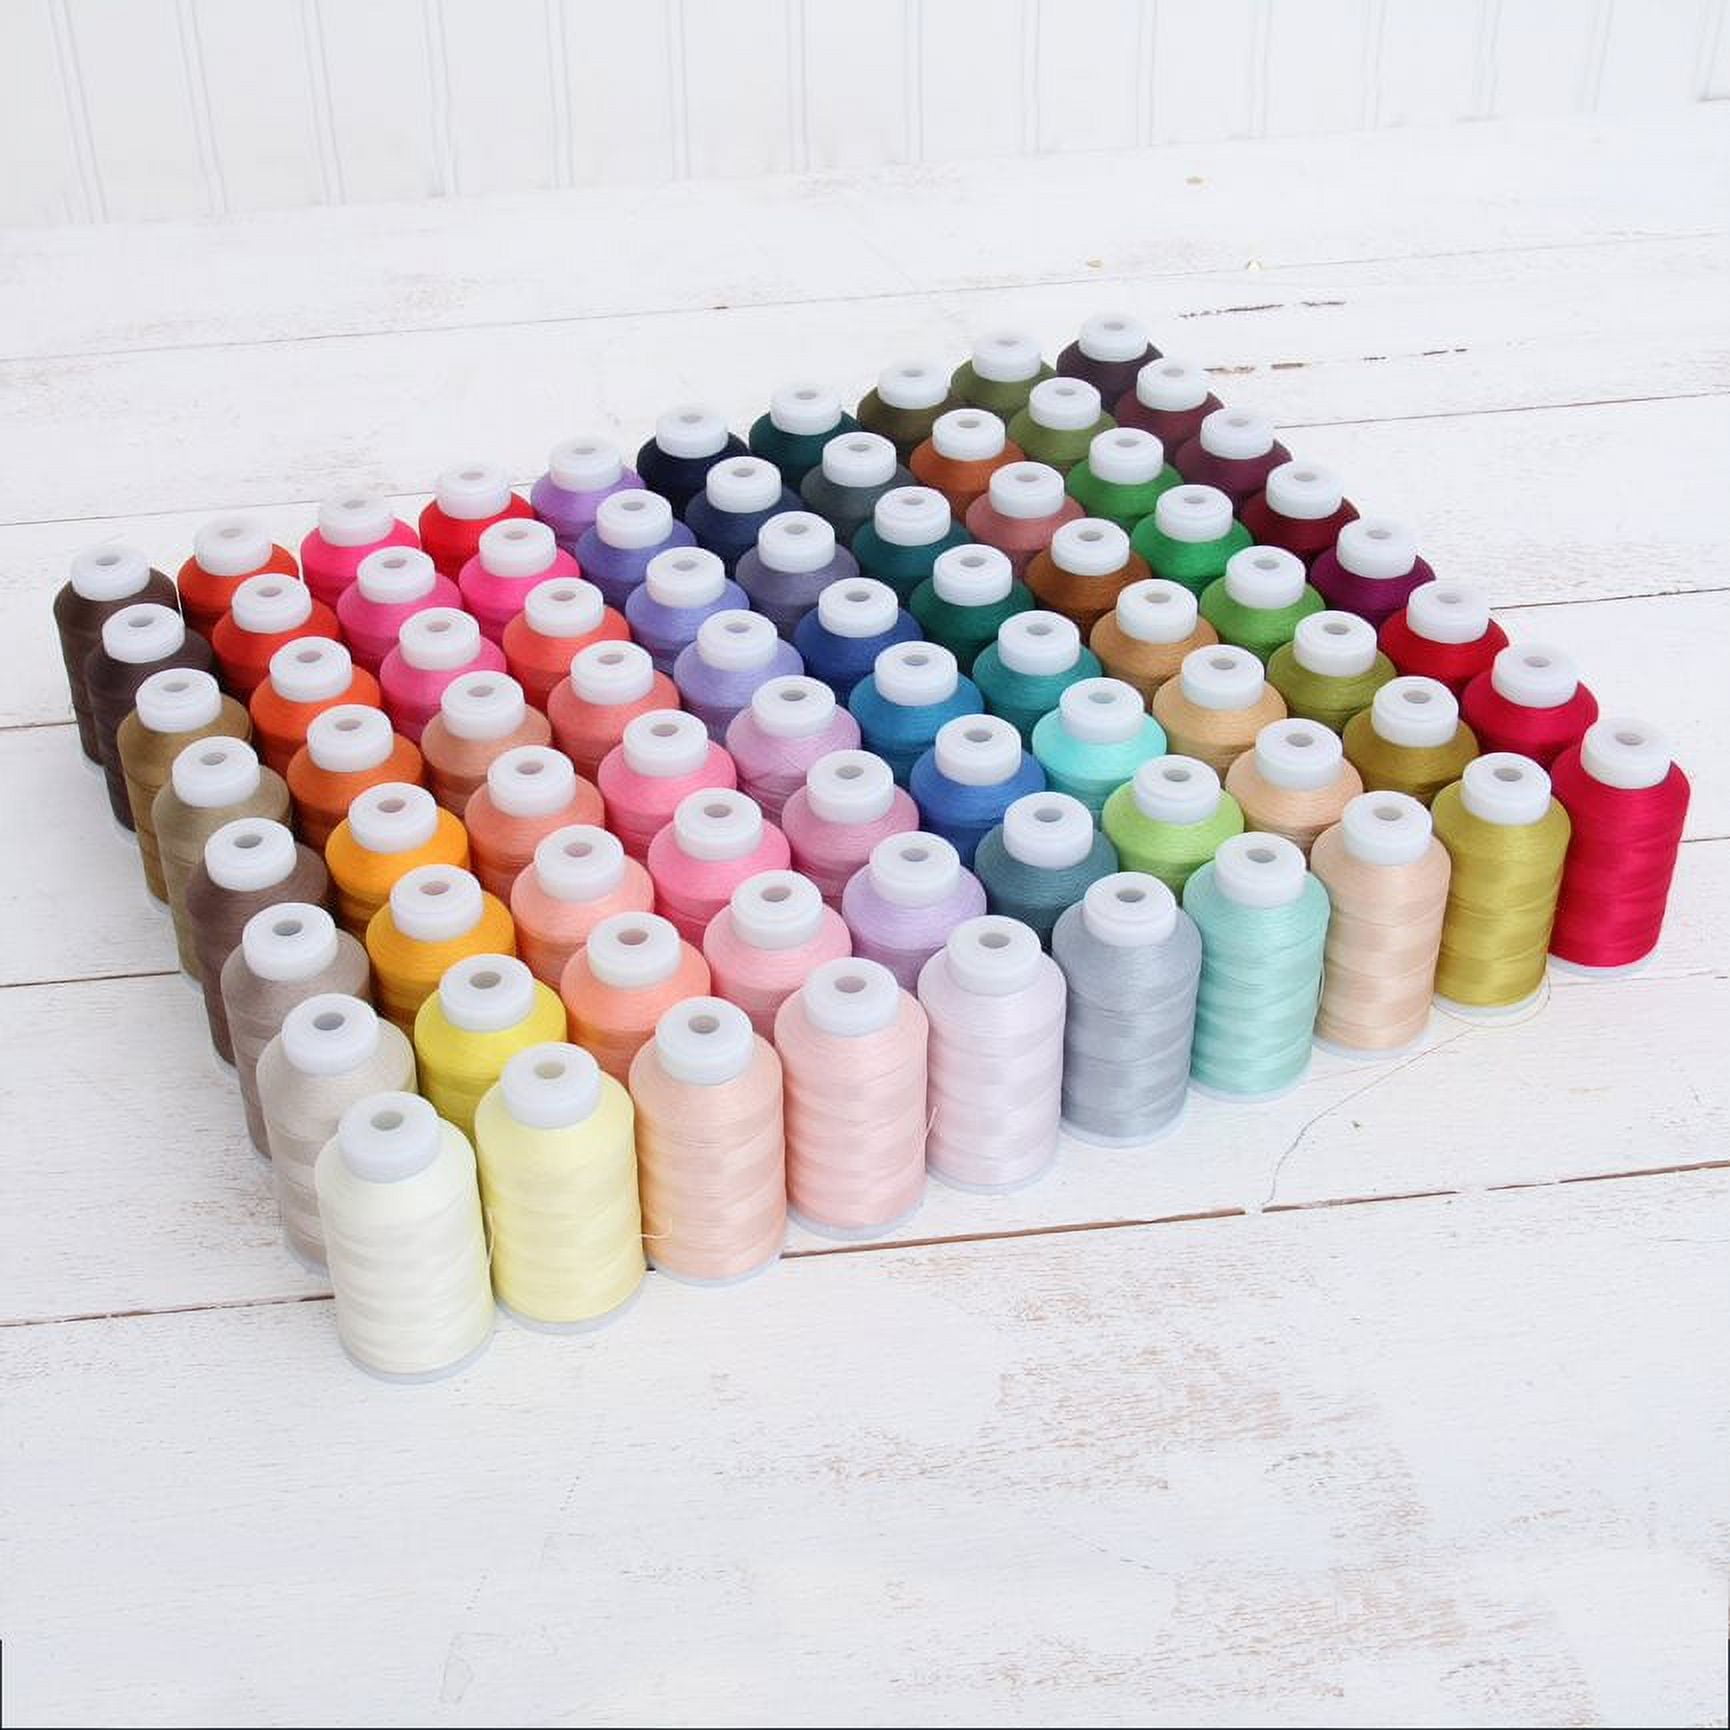 Simthread Polyester Embroidery Thread, 80 Spools 80 Janome Color